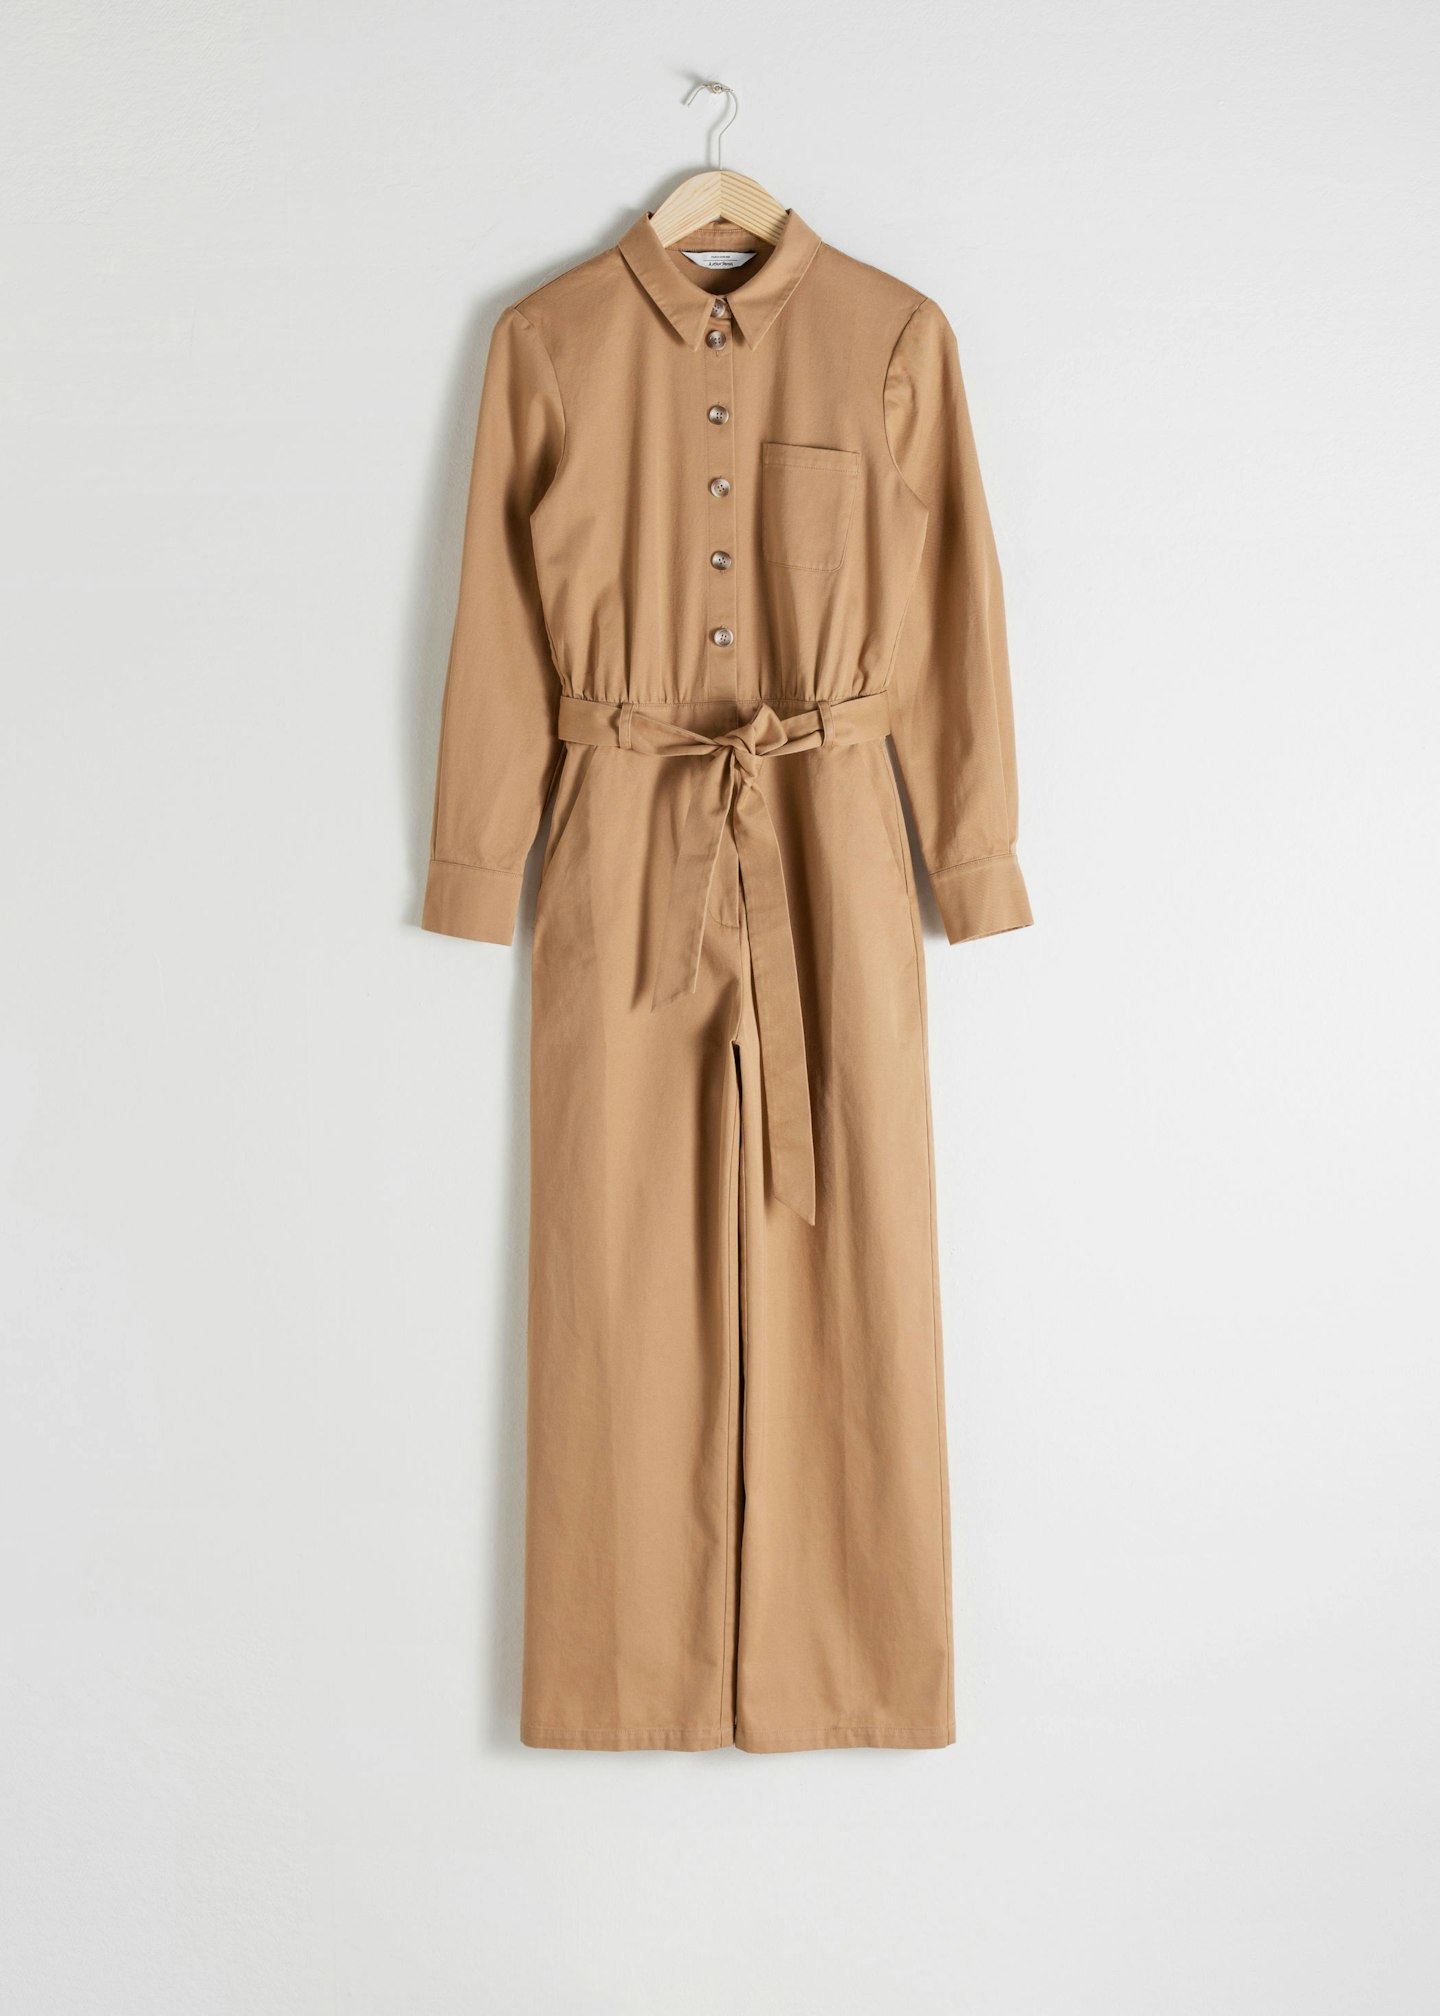 Boiler Suit, £79, & Other Stories